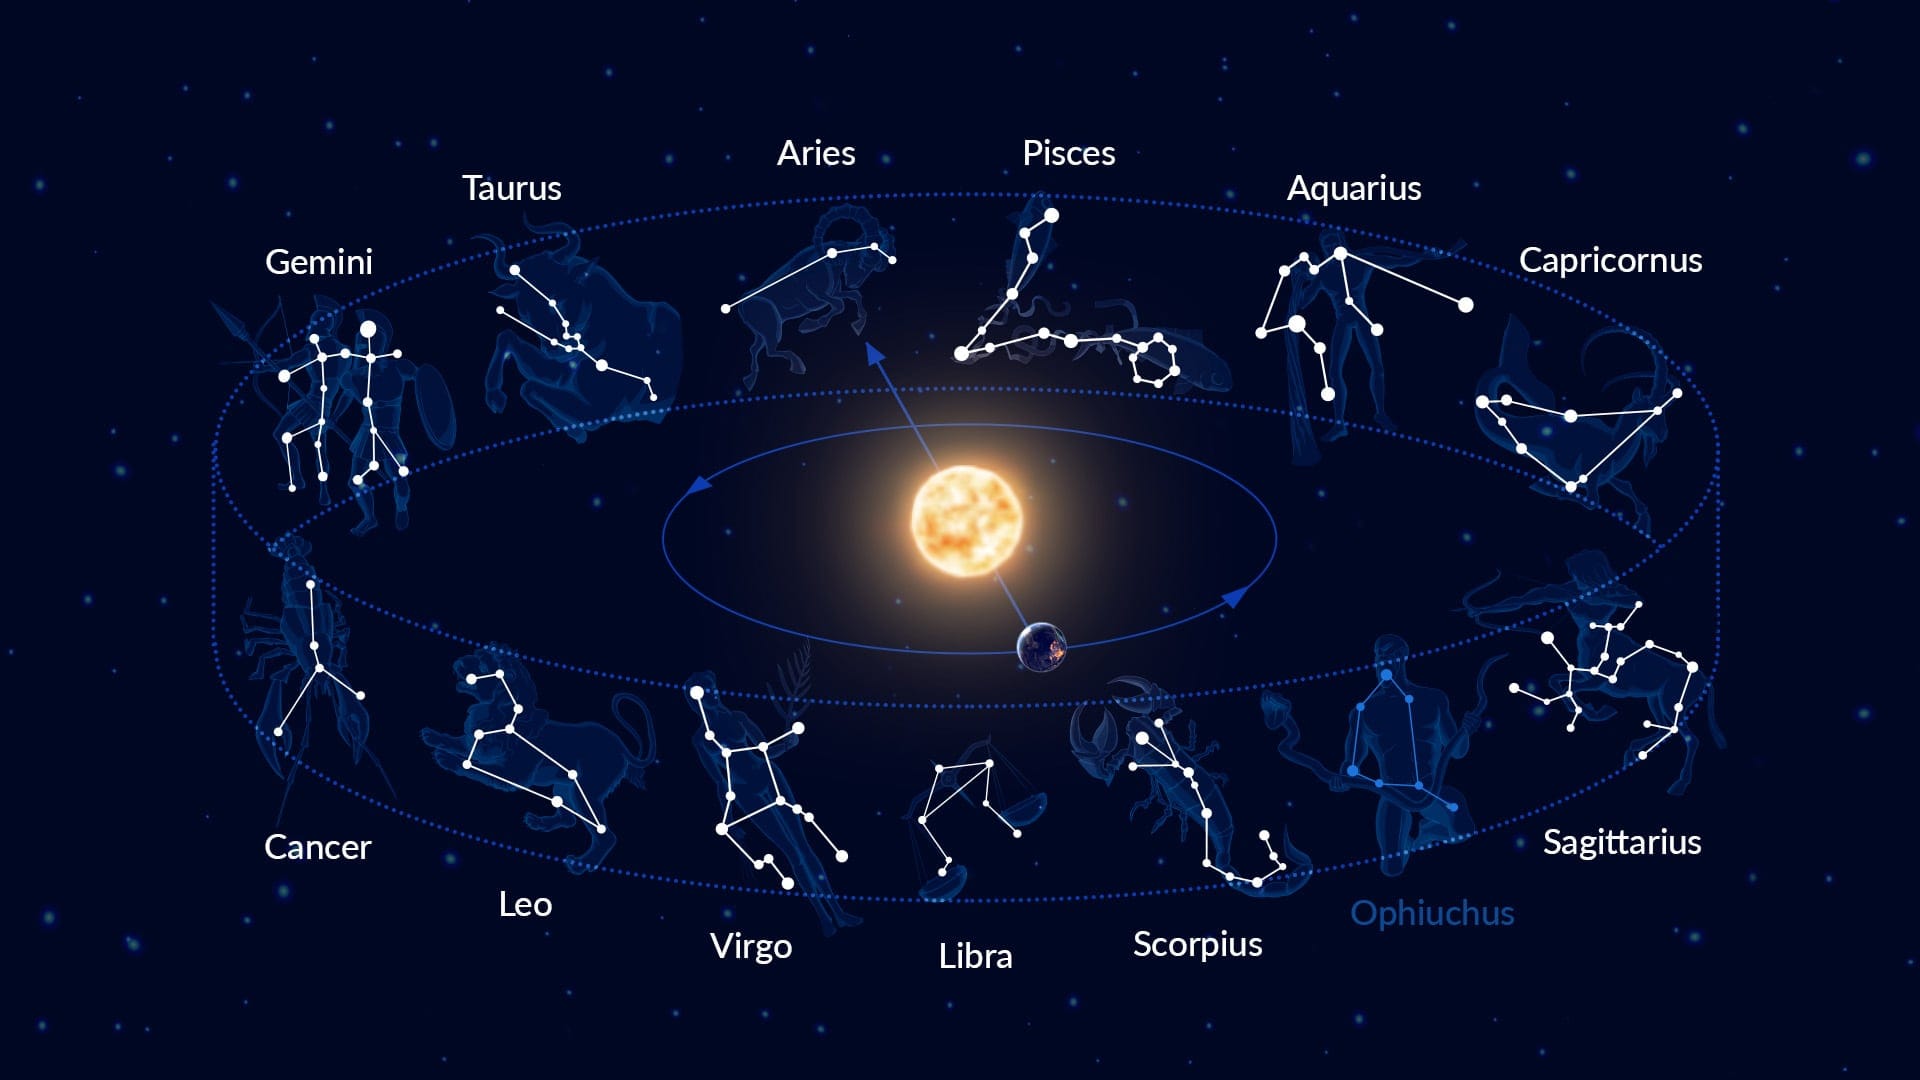 A view of some of the constellations.